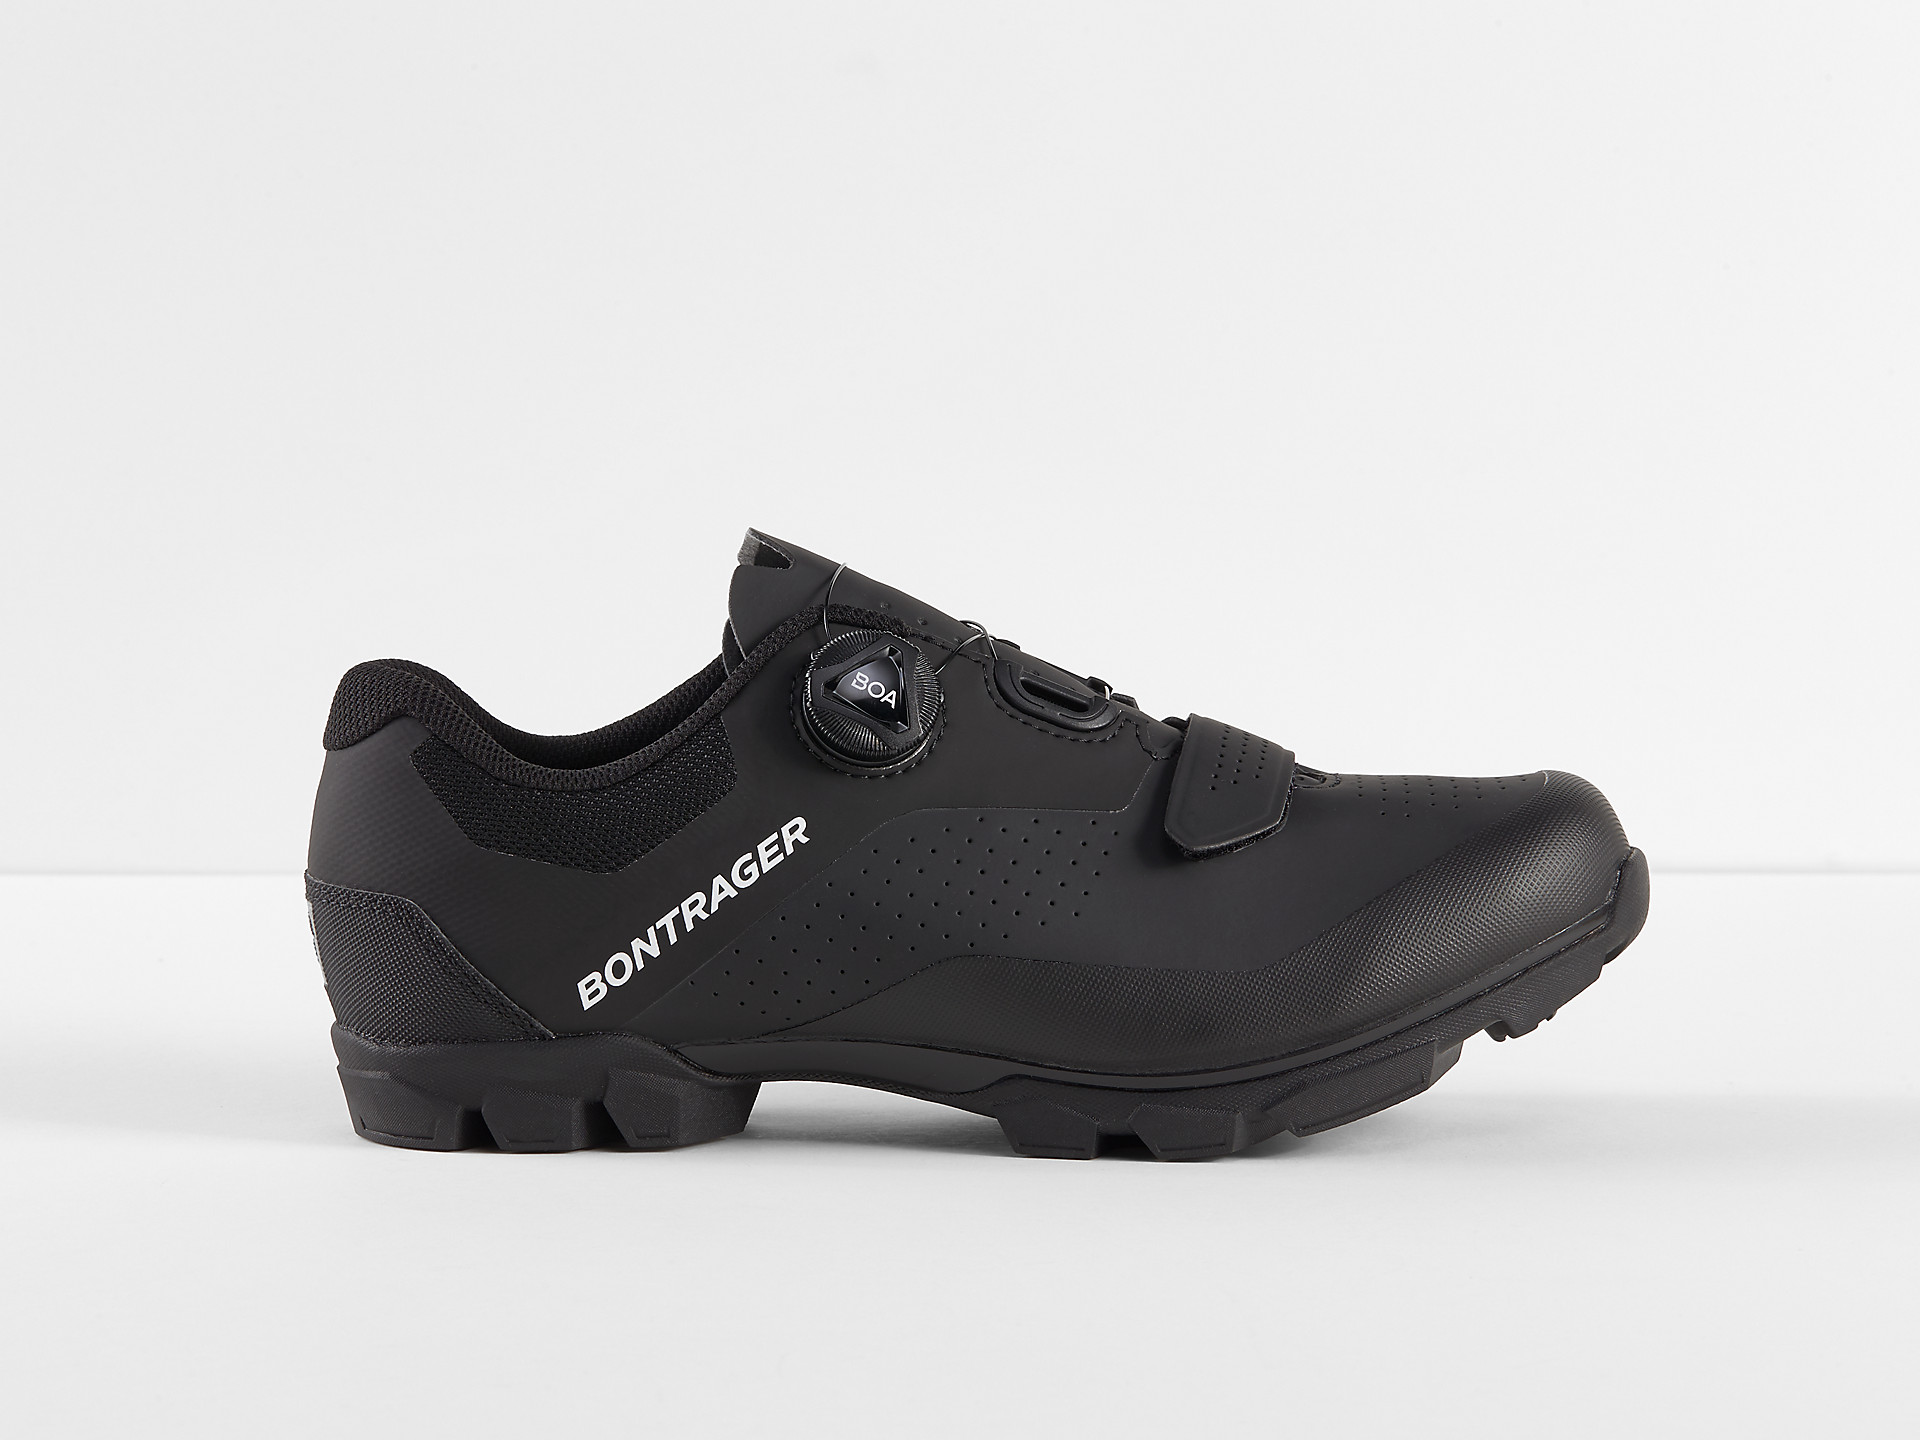 <a href="https://cycles-clement.be/product/bont-chaussures-foray-vtt-47-black/">BONT CHAUSSURES FORAY VTT 47 BLACK</a>